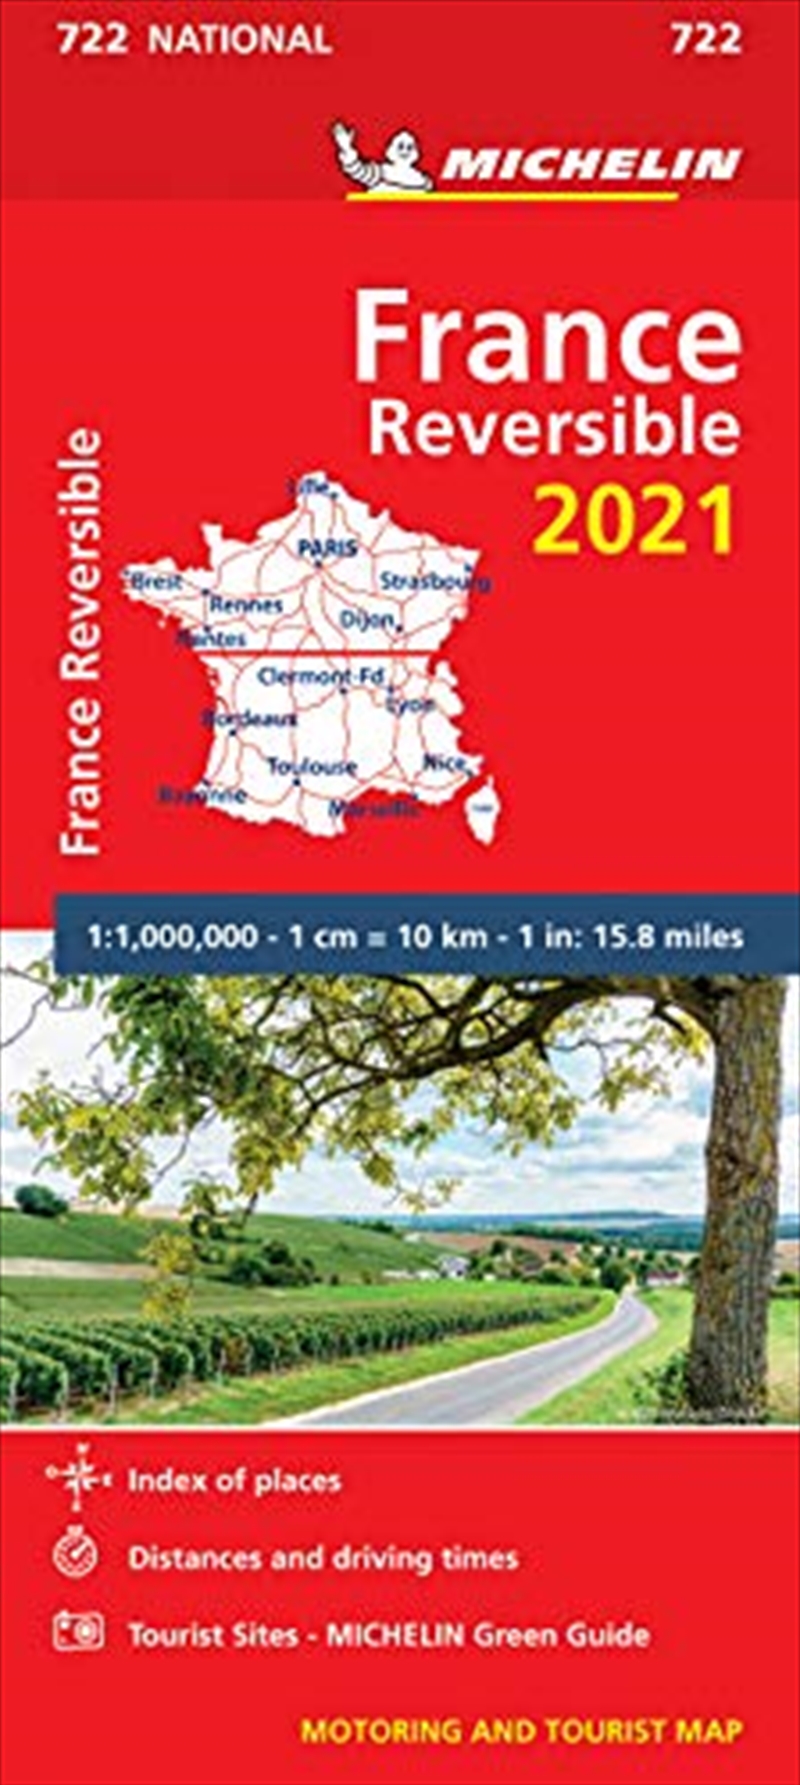 France - reversible 2021 - Michelin National Map 722: Maps (Michelin National Maps)/Product Detail/Recipes, Food & Drink